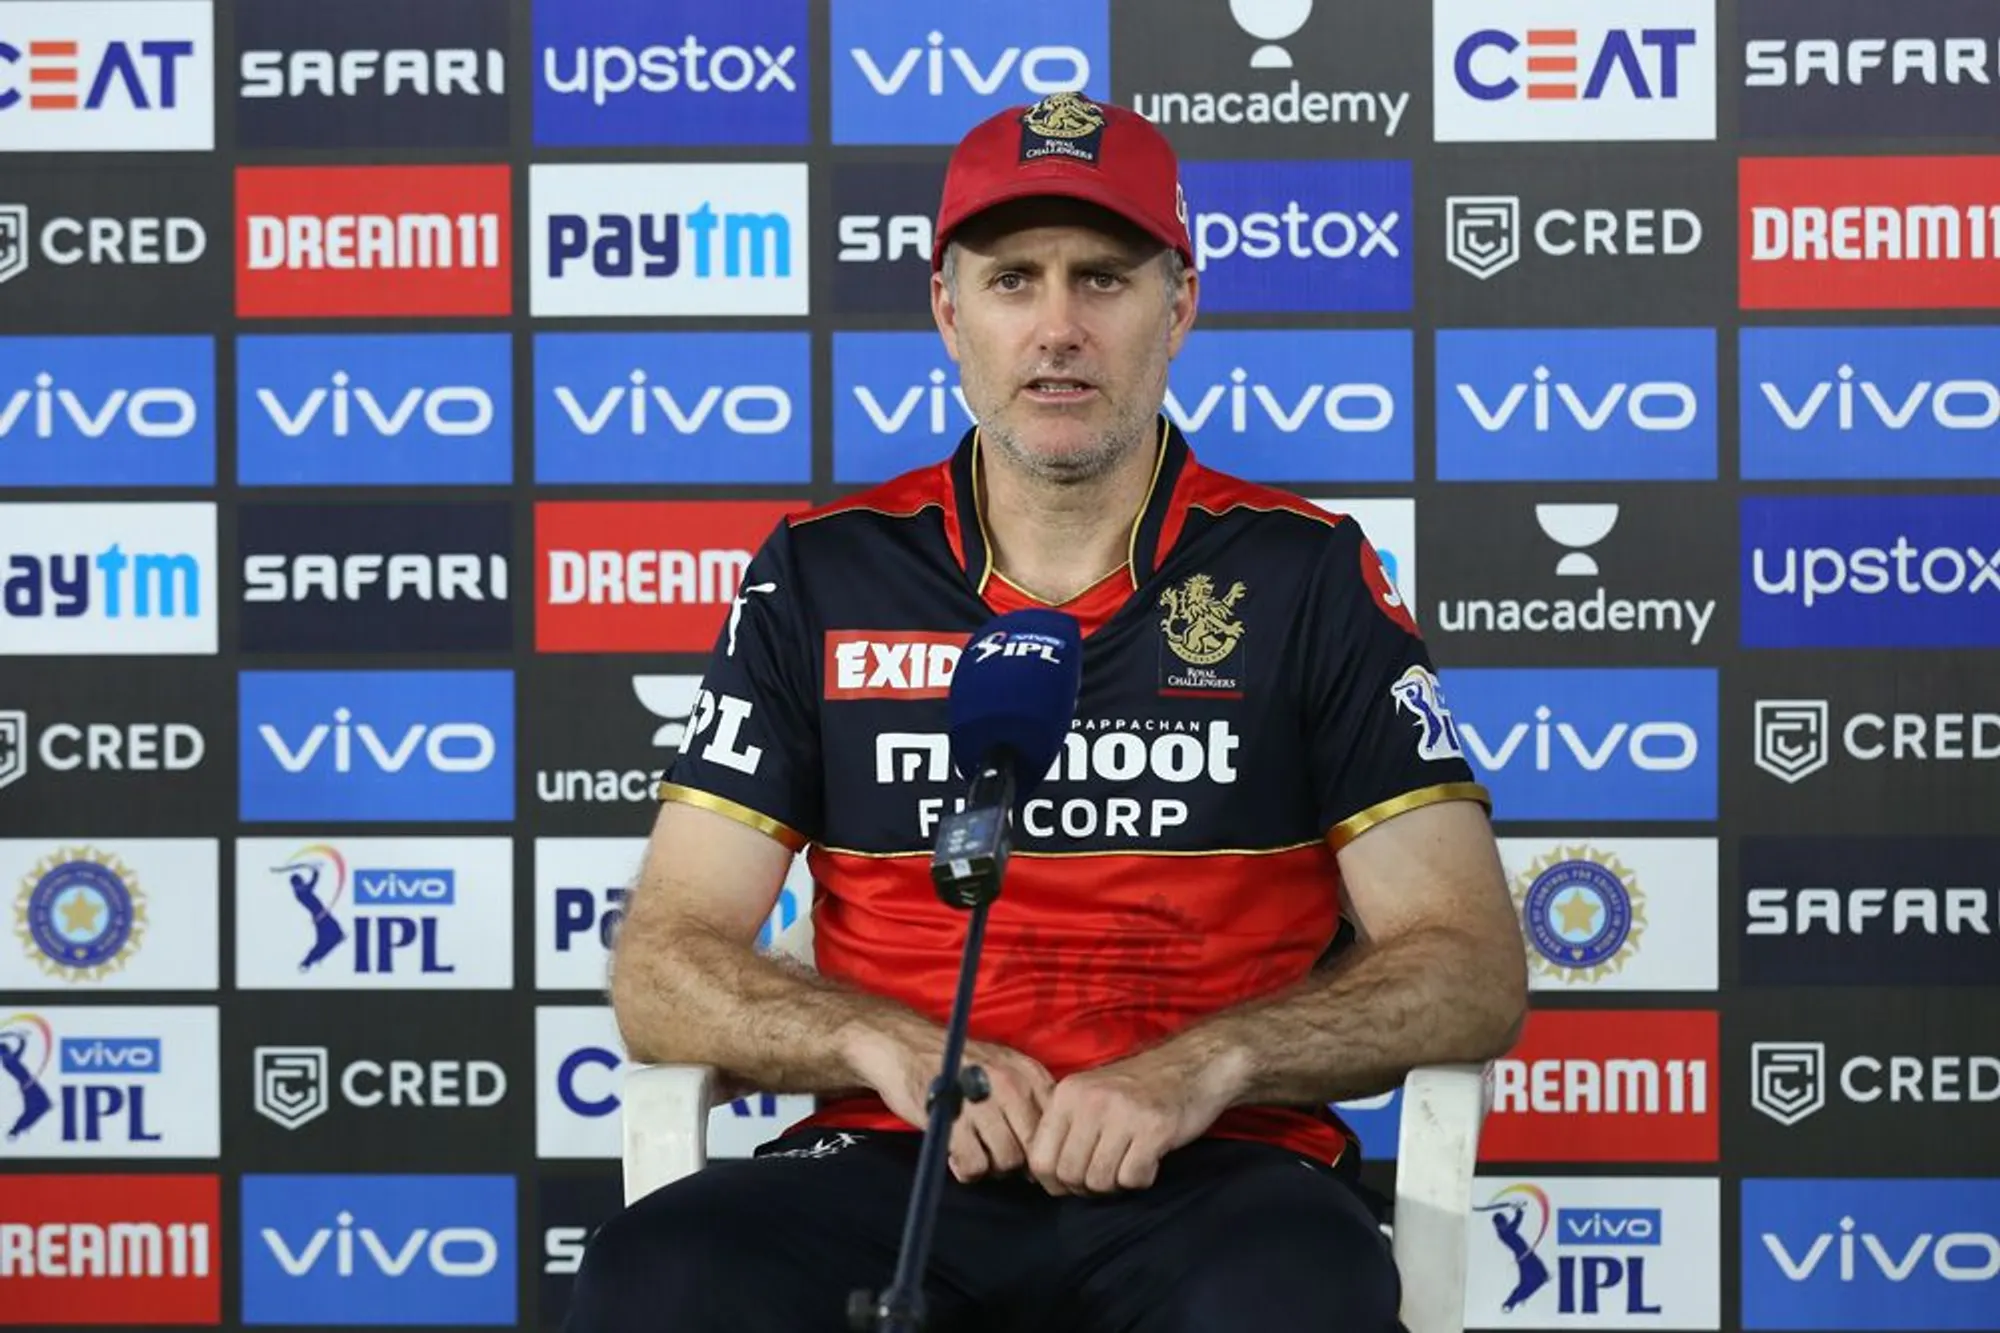 Reports | Sunrisers Hyderabad assistant coach Simon Katich resigns ahead of IPL 2022